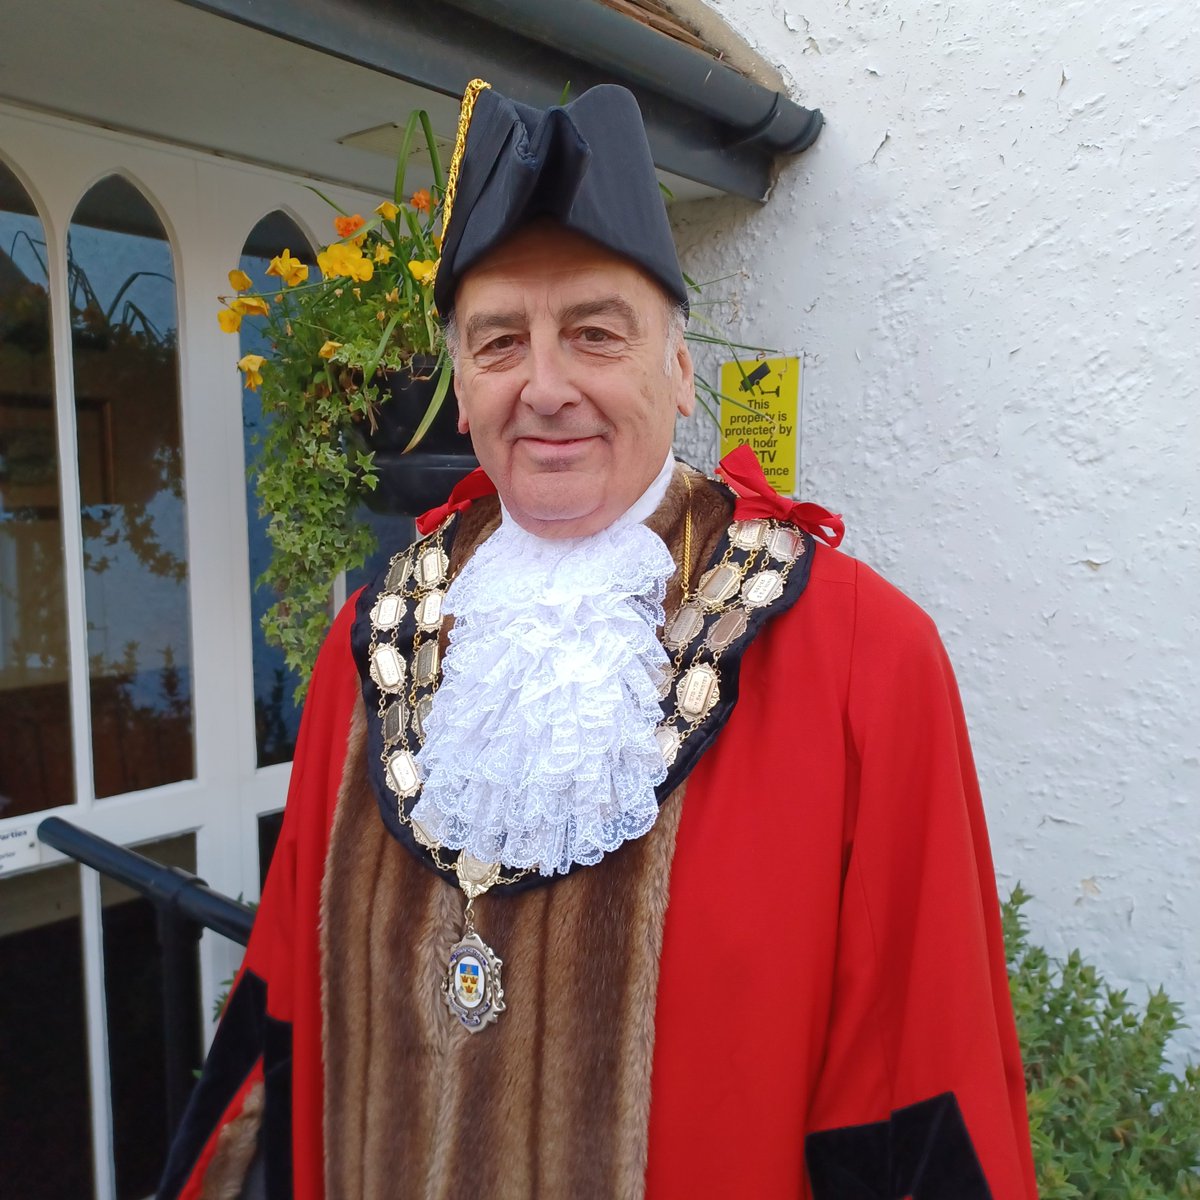 Councillor Nick Gowrley was elected Stowmarket Town Mayor by his fellow Councillors on Wednesday 17th May at the Annual Town Meeting. The new Mayor will be supporting two local charities, Stowmarket Relief Trust and AJ's Legacy, throughout his 12-month term of office.